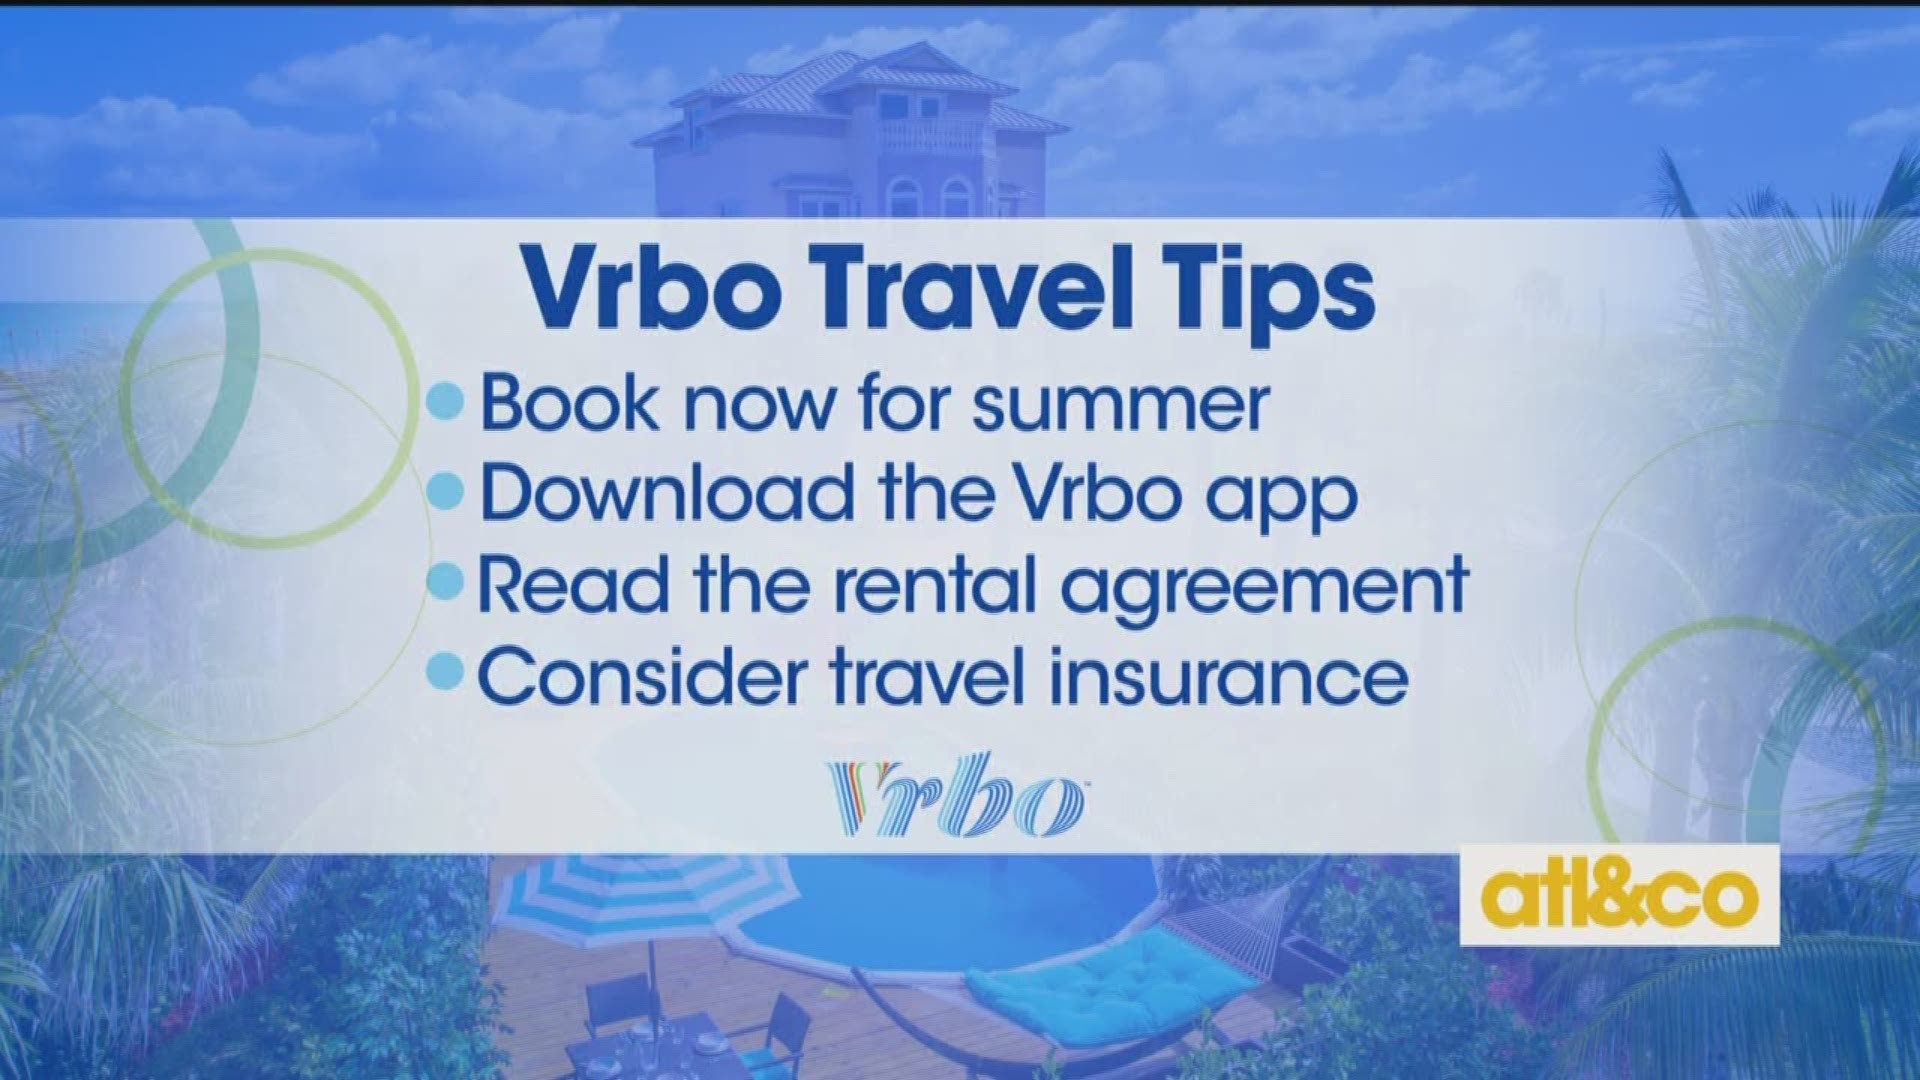 Get great travel tips with Vrbo and download their app for easy vacay planning on 'Atlanta & Company'